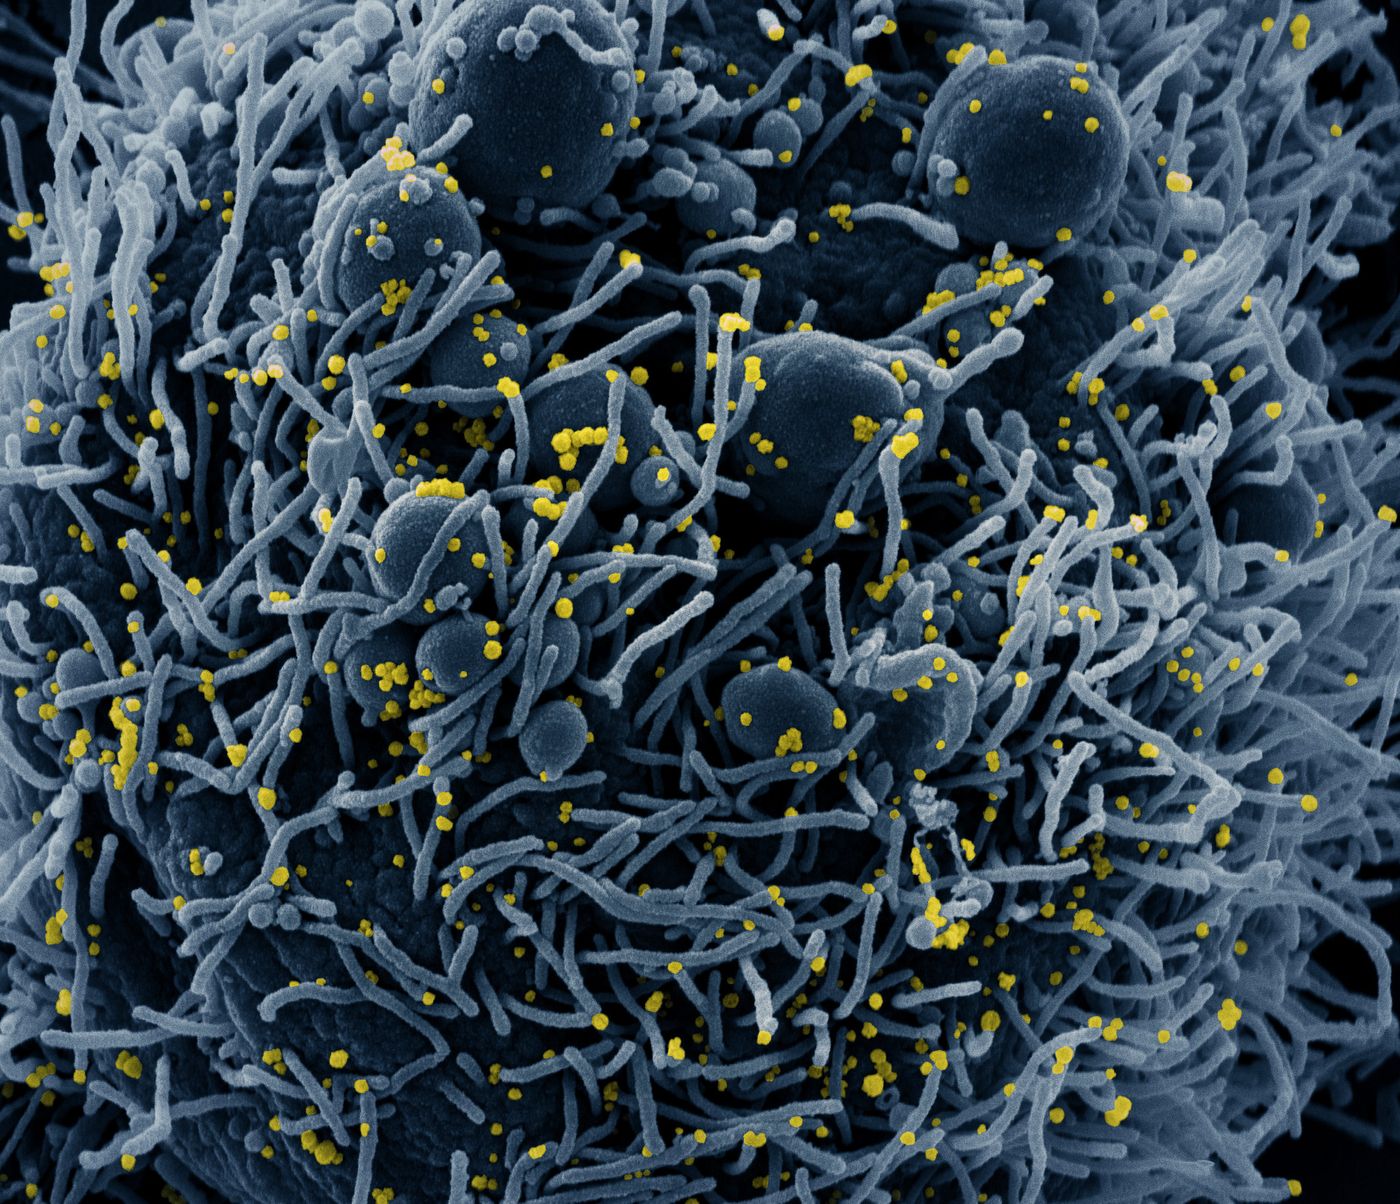 Colorized scanning electron micrograph of an apoptotic cell (blue) infected with SARS-COV-2 virus particles (yellow), isolated from a patient sample. Image captured at the NIAID Integrated Research Facility (IRF) in Fort Detrick, Maryland. / Credit: NIAID